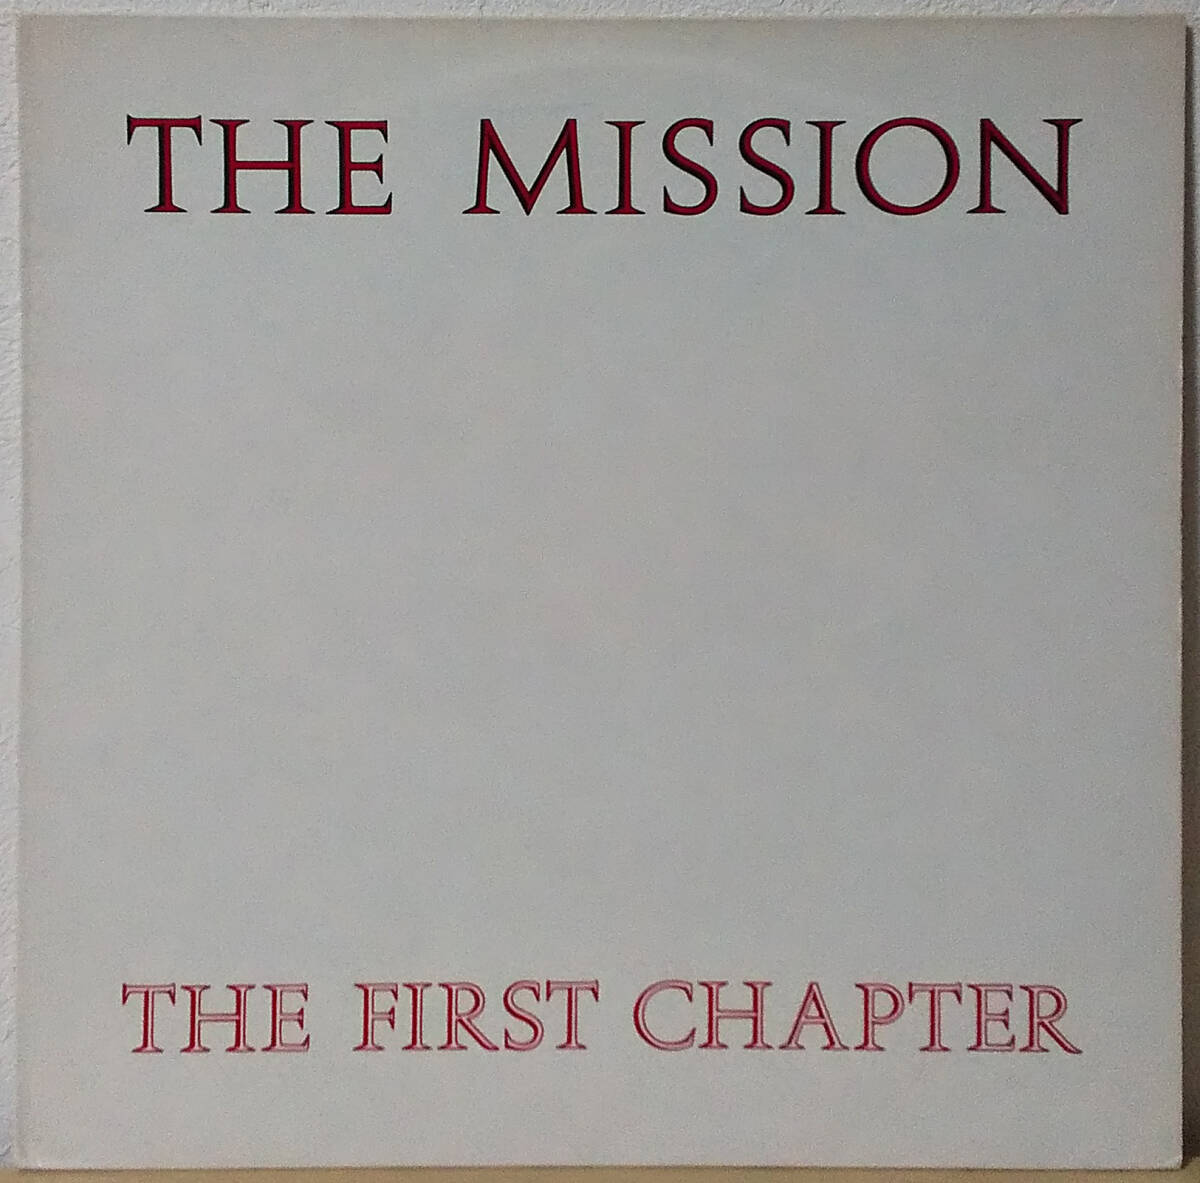 The Mission The First Chapter UK盤 LP Mercury - MISH 1 ザ・ミッション 1987年 Sisters of Mercy, gothic rockの画像1